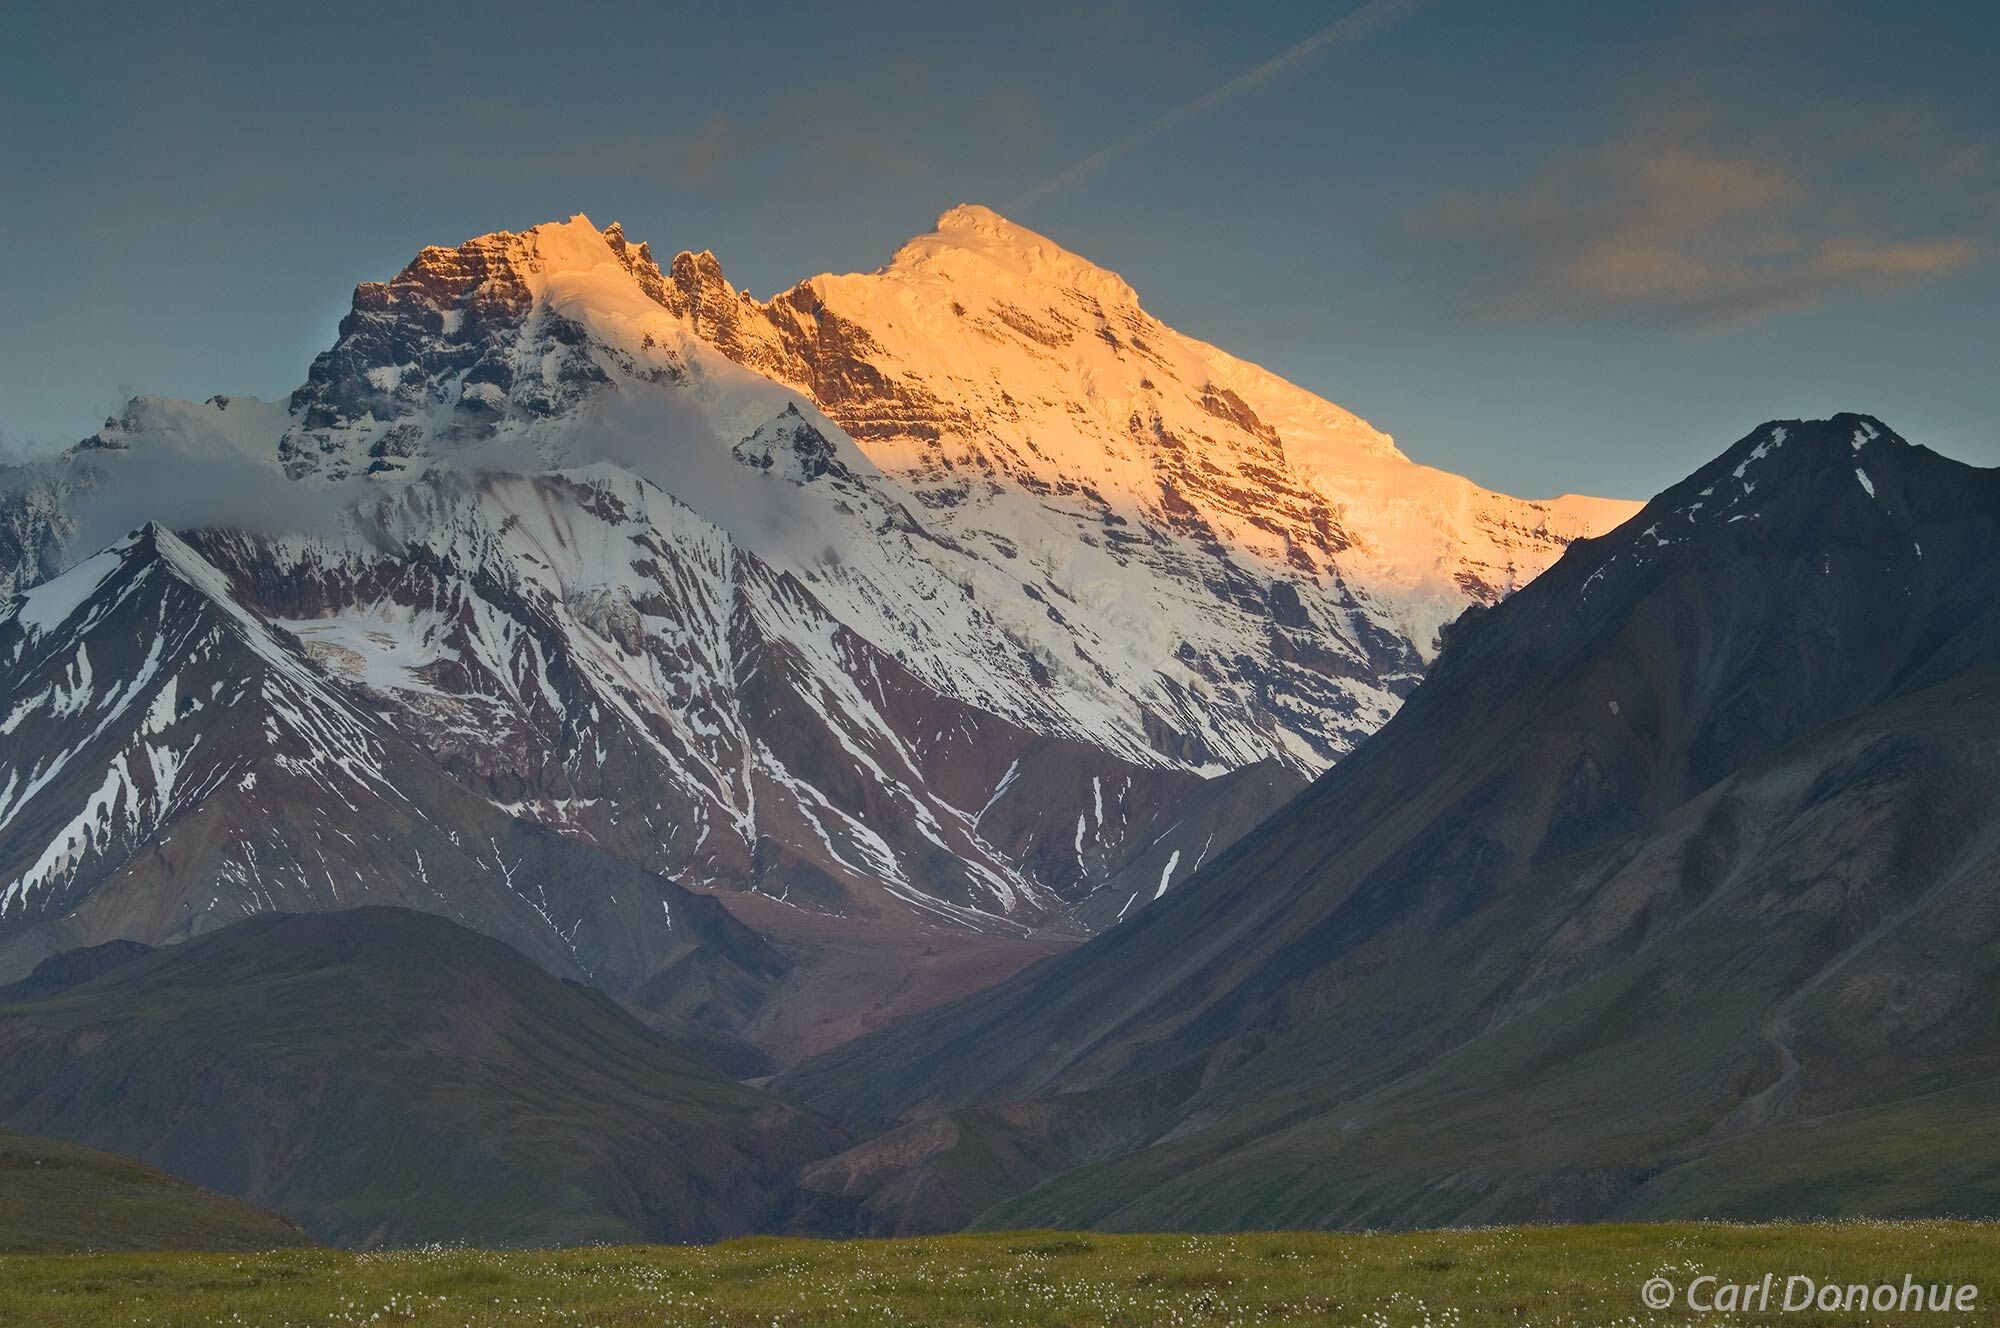 Mt Drum at first light, from a backpacking trip on the Sanford Plateau, Wrangell-St. Elias National Park, Alaska.